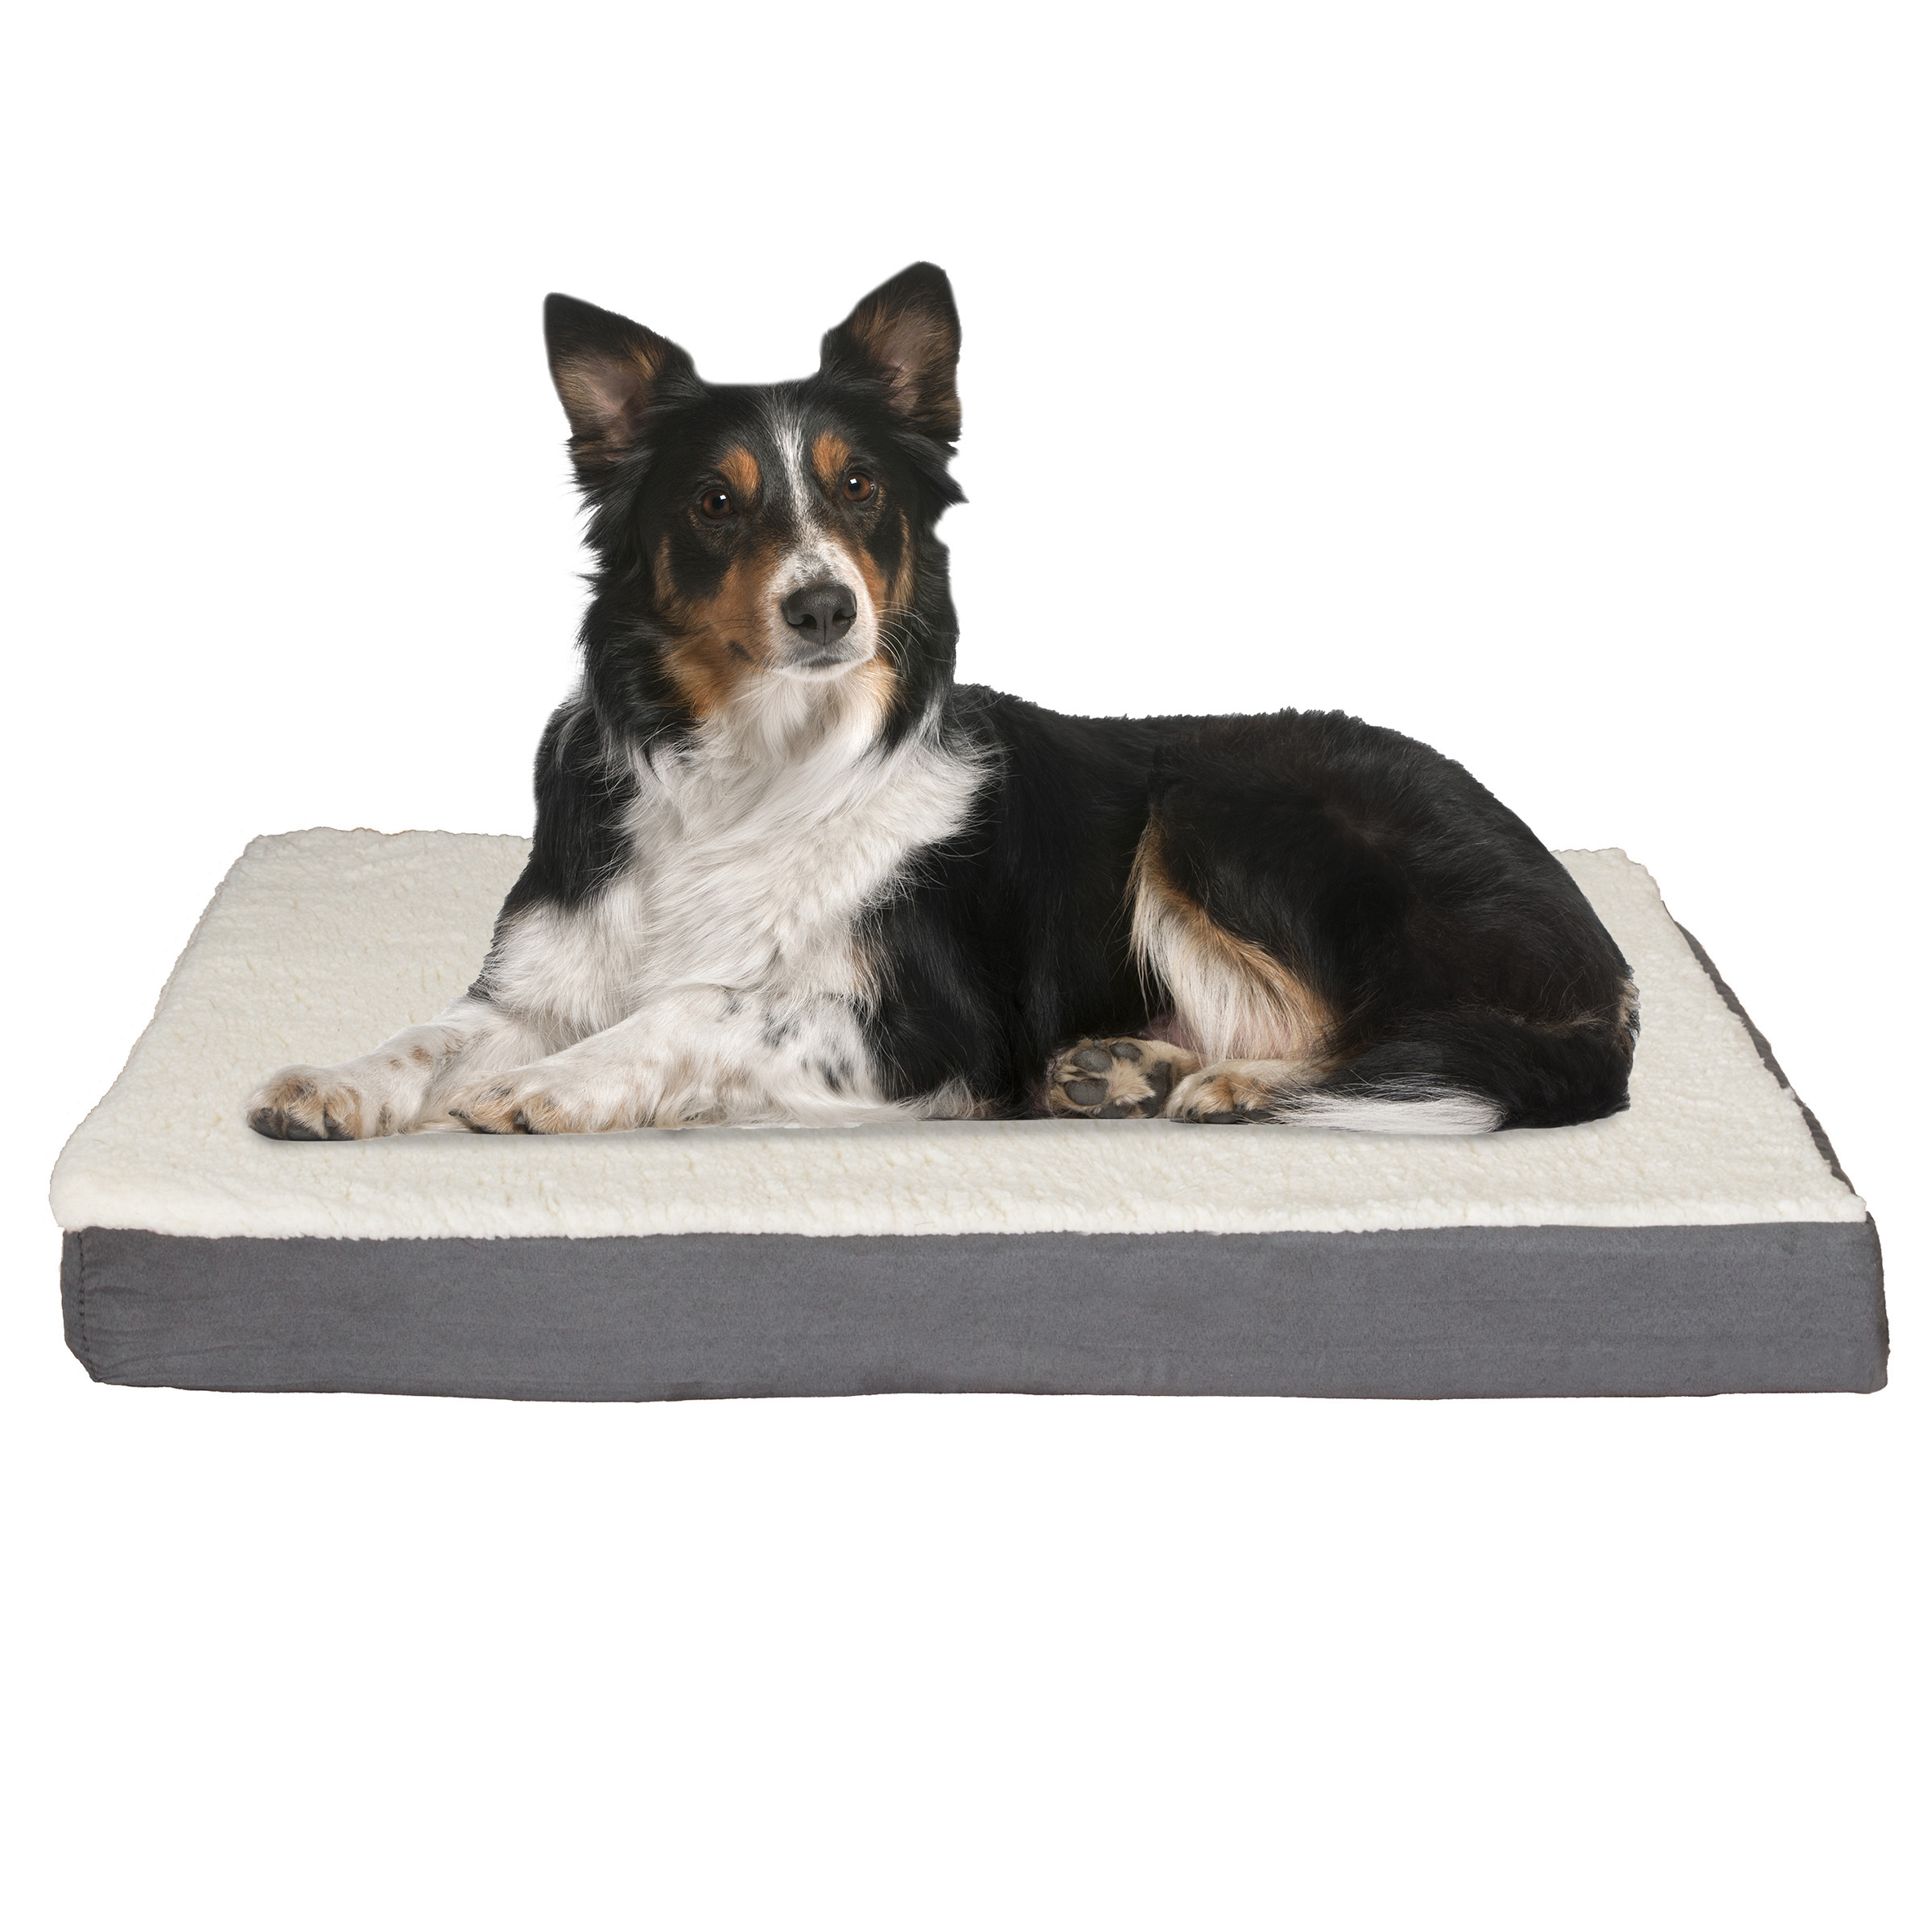 Orthopedic Dog Bed - 2-Layer 36x27-Inch Memory Foam Pet Mattress with Machine-Washable Sherpa Cover for Large Dogs up to 65lbs by PETMAKER (Gray) - image 1 of 7